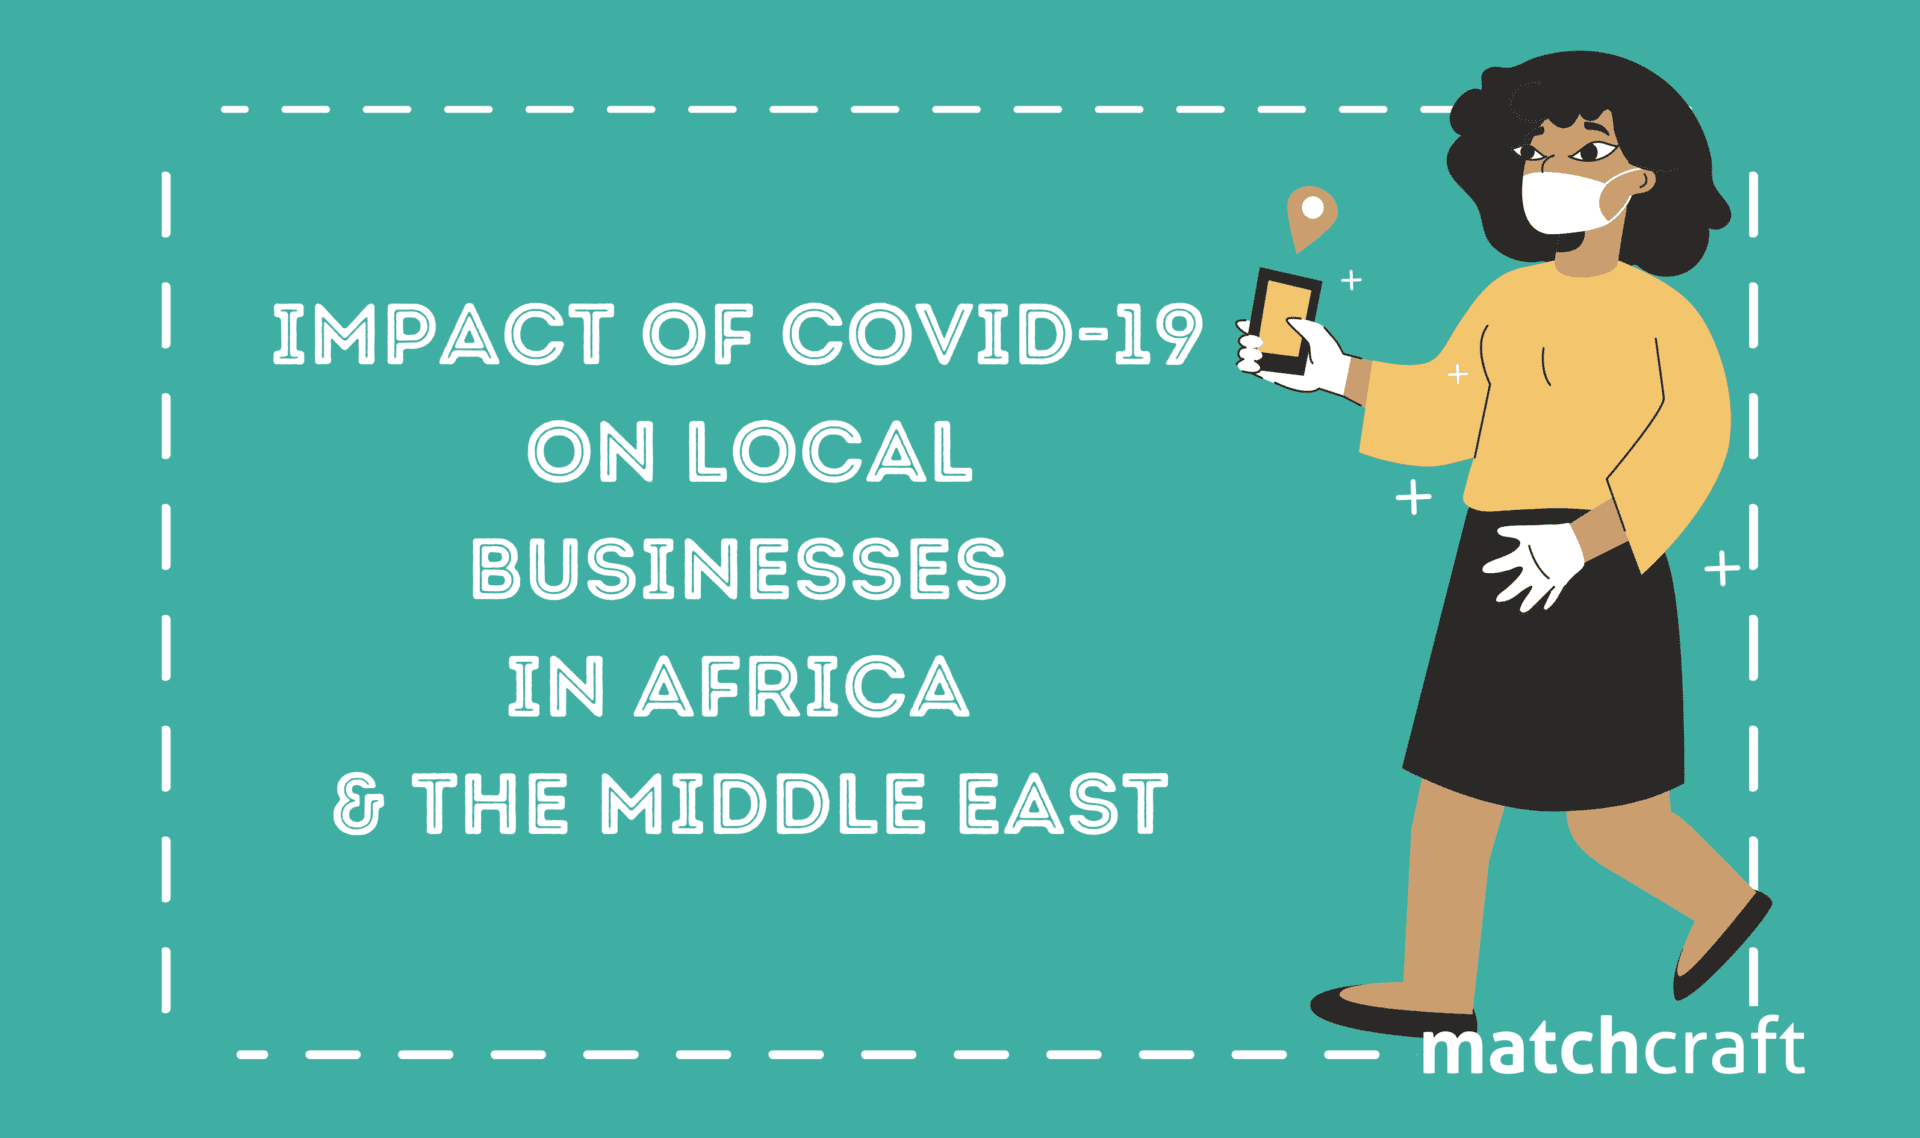 The Impact of COVID-19 on Local Businesses in Africa & the Middle East